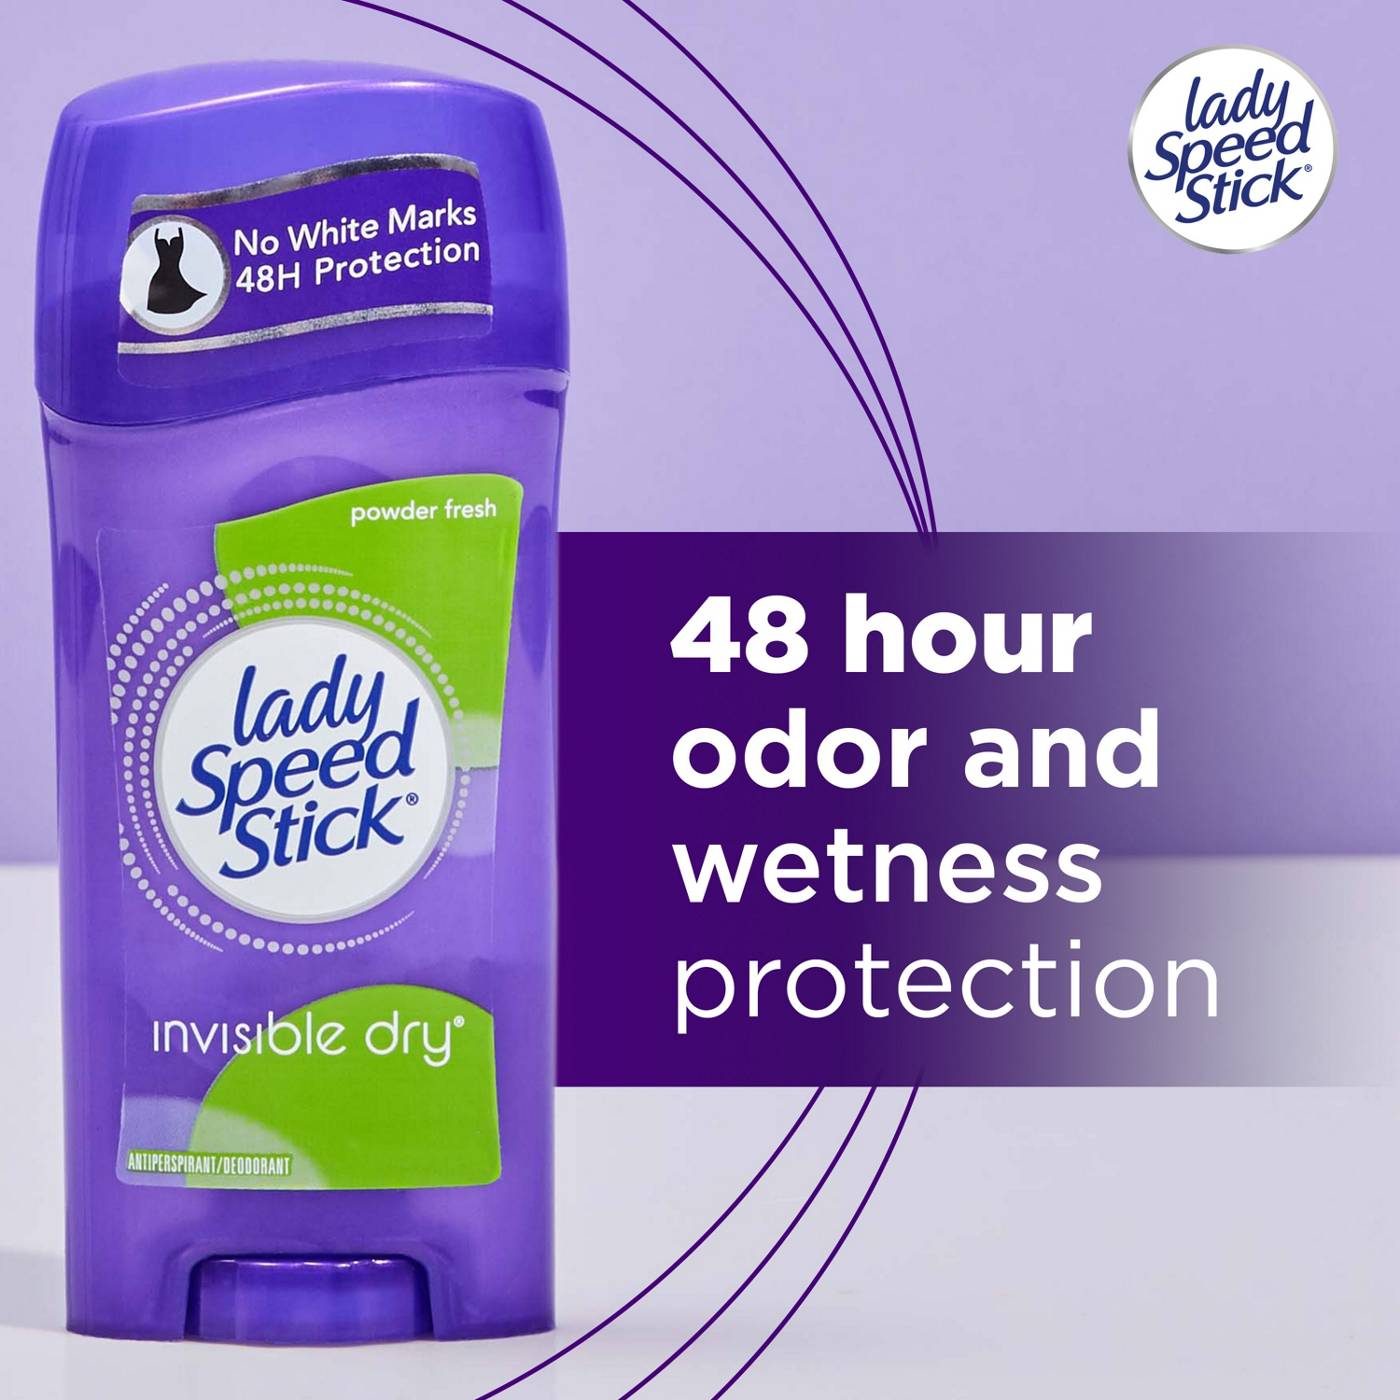 Lady Speed Stick Invisible Dry Deodorant - Powder Fresh; image 6 of 9